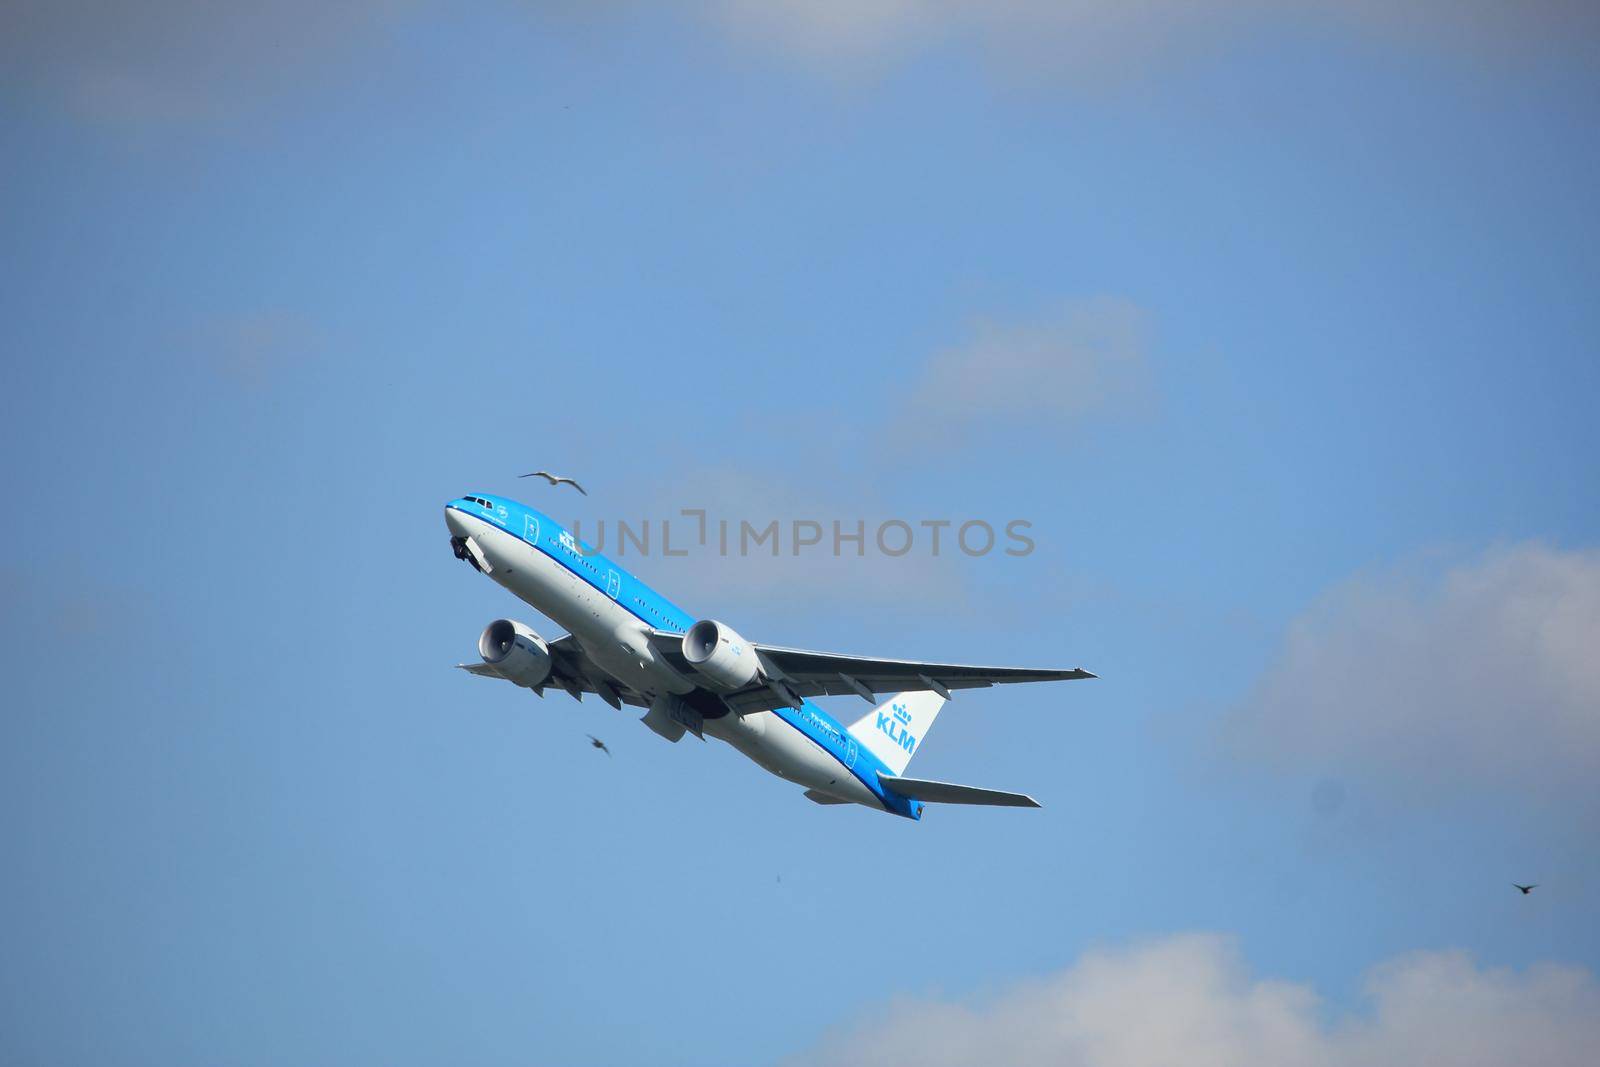 Amsterdam the Netherlands - September 23rd 2017: PH-BQD KLM Royal Dutch Airlines Boeing 777-200 takeoff from Kaagbaan runway, Amsterdam Airport Schiphol